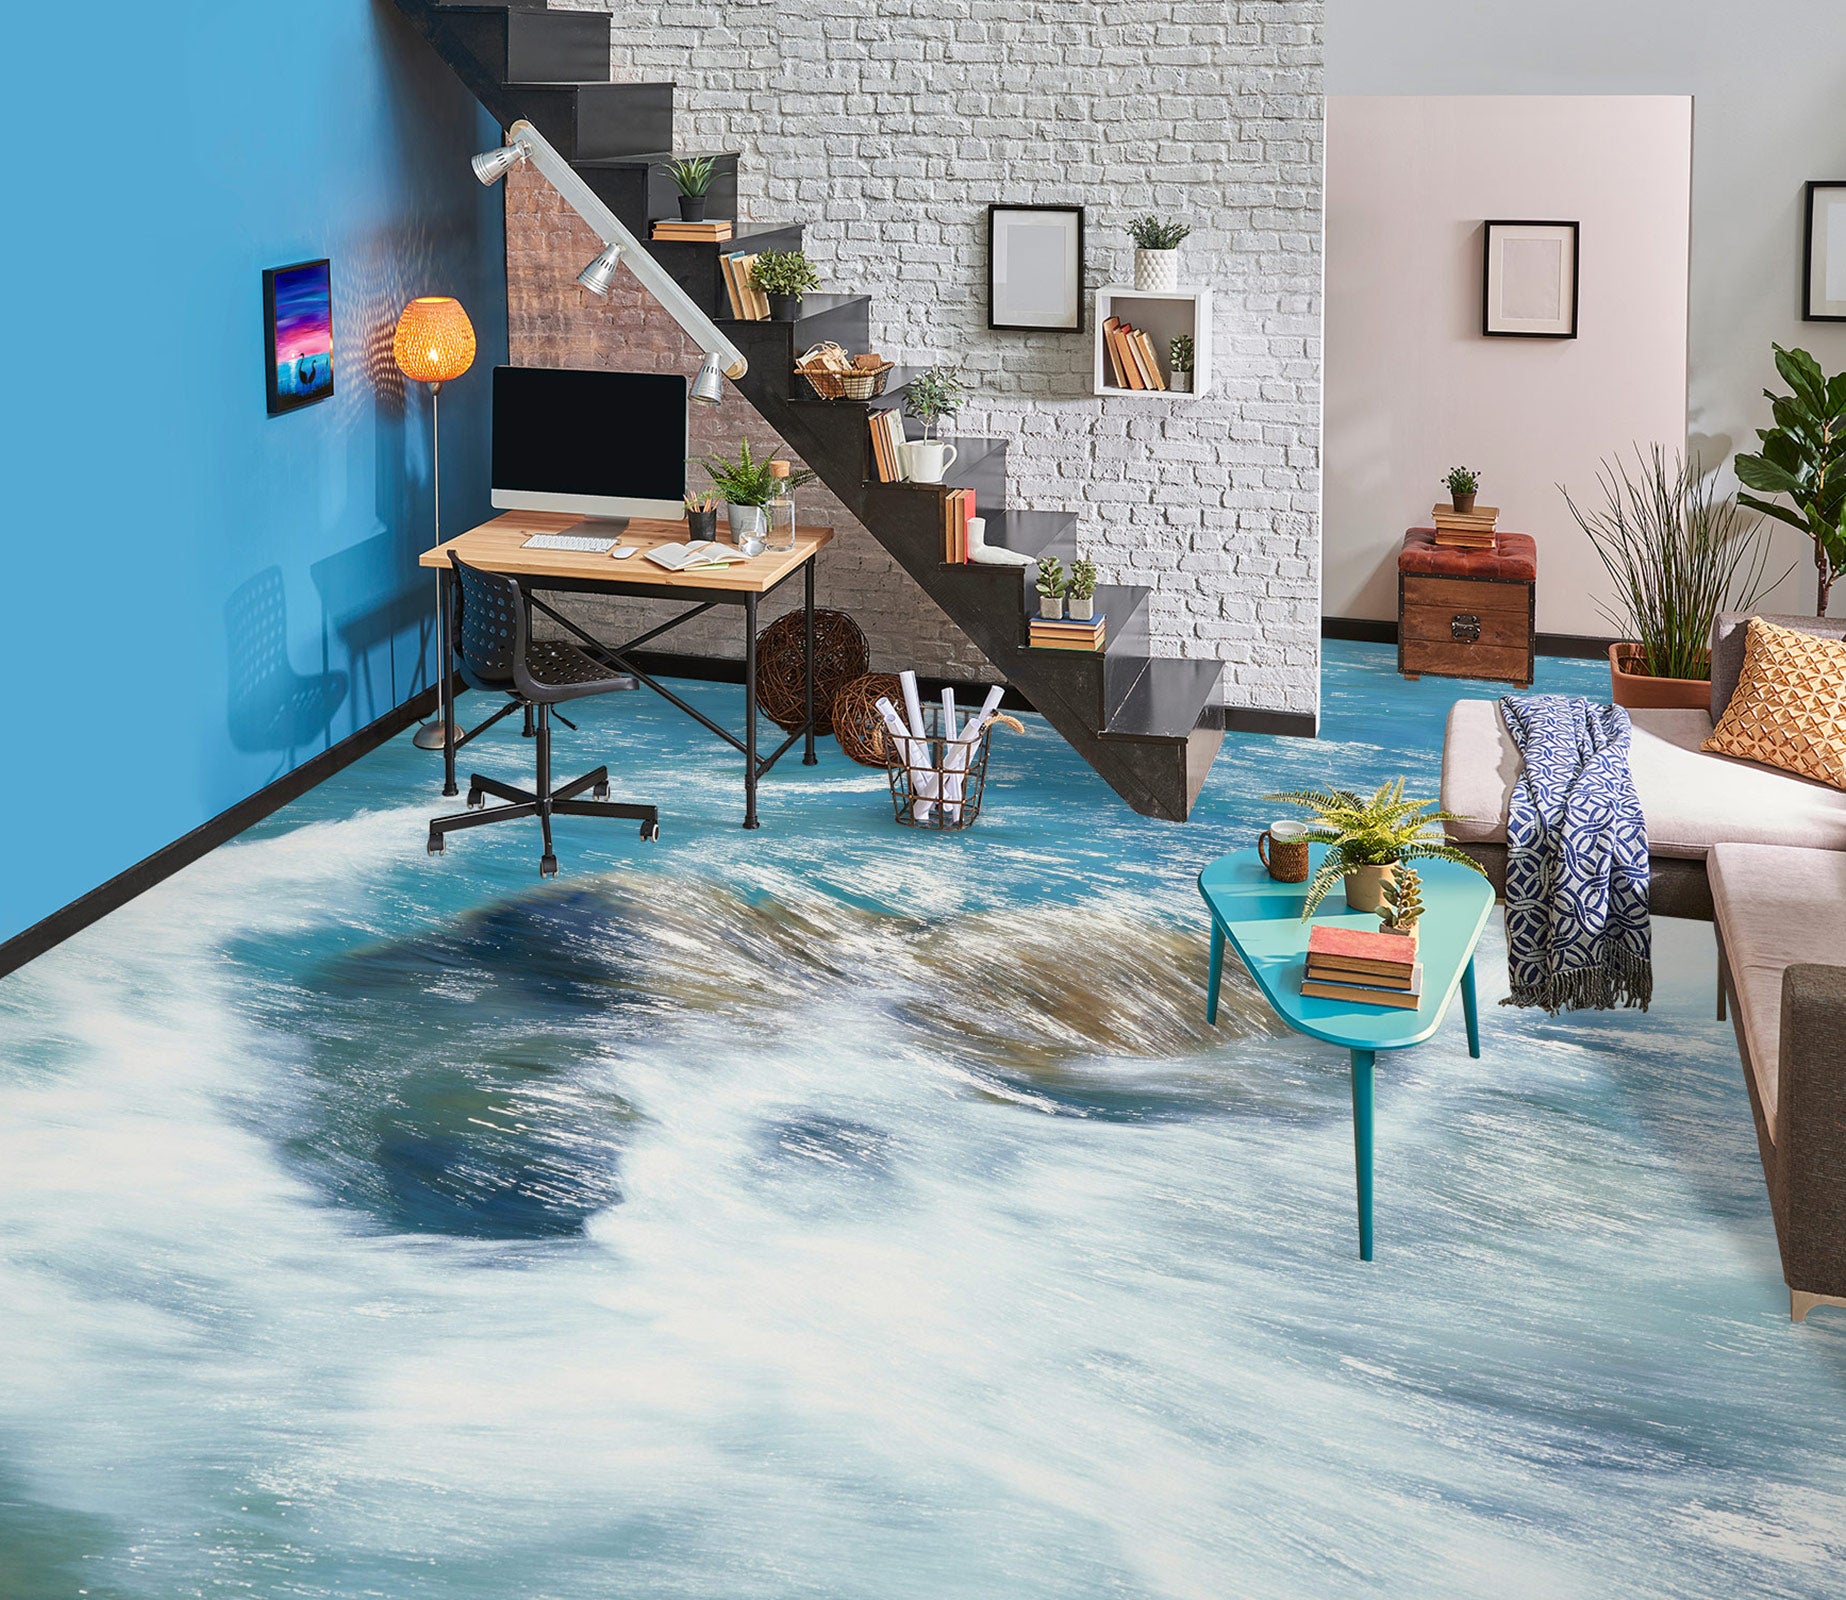 3D Sea Of Time 1381 Floor Mural  Wallpaper Murals Self-Adhesive Removable Print Epoxy